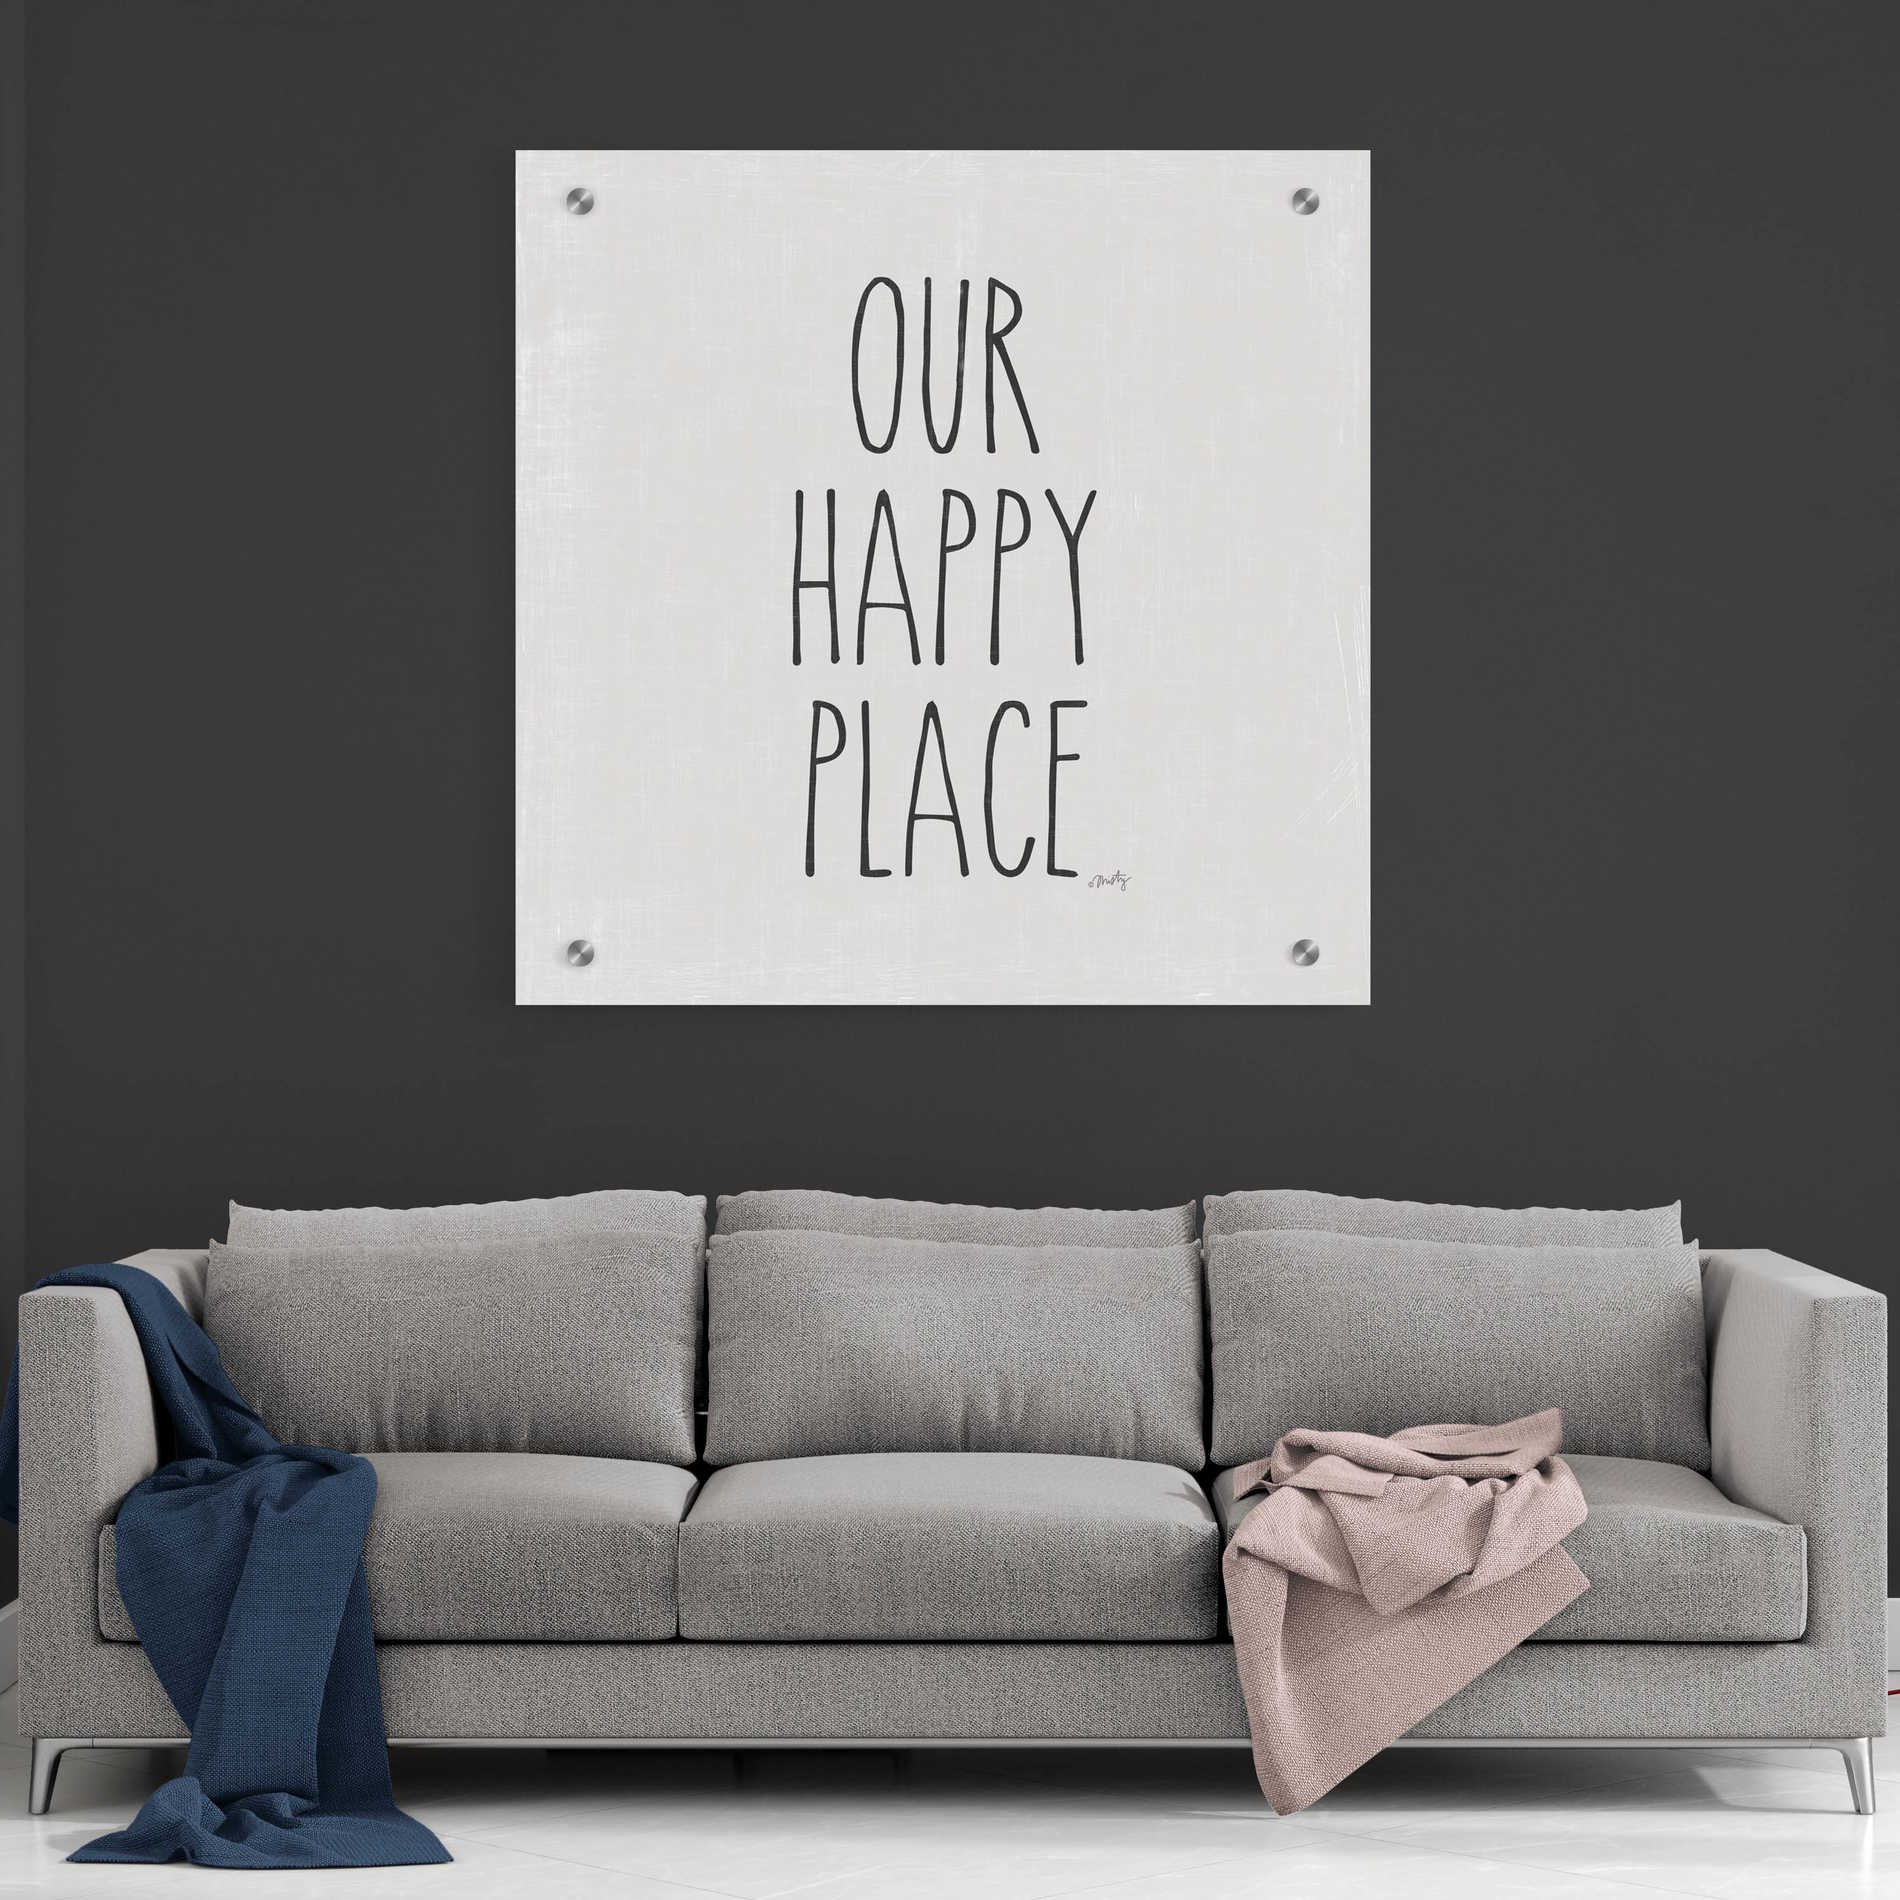 Epic Art 'Our Happy Place' by Misty Michelle, Acrylic Glass Wall Art,36x36